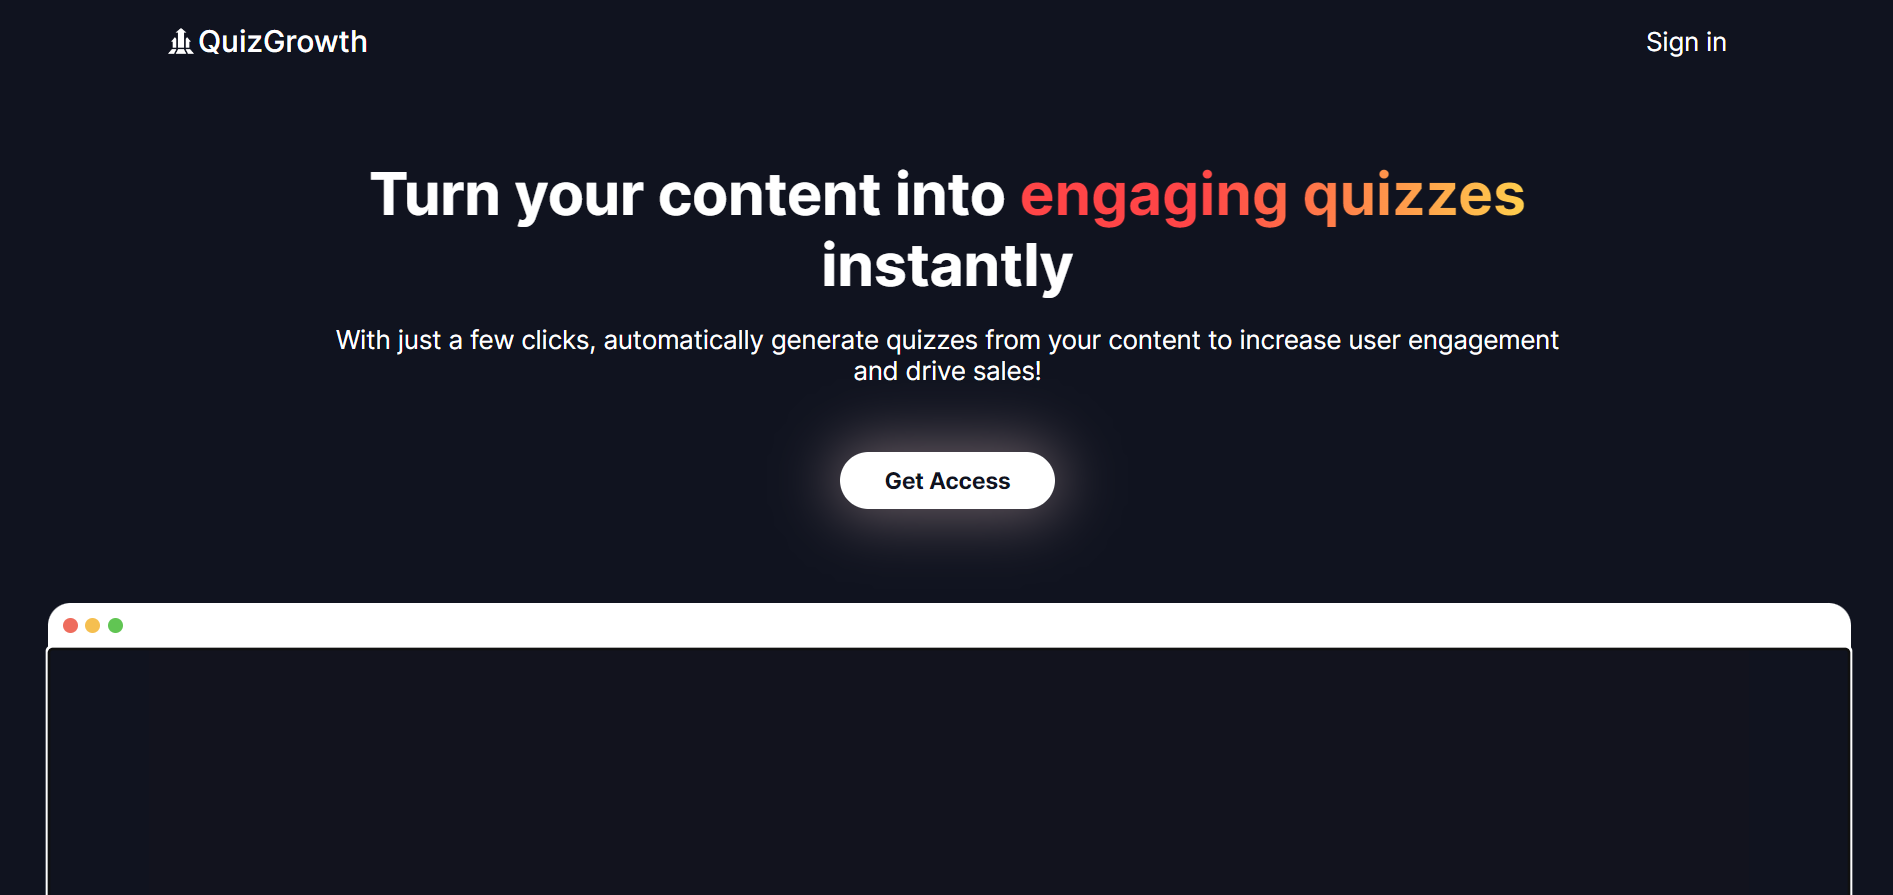 Quizgrowth.com: Turn Your Content into Fun Quizzes in Seconds!